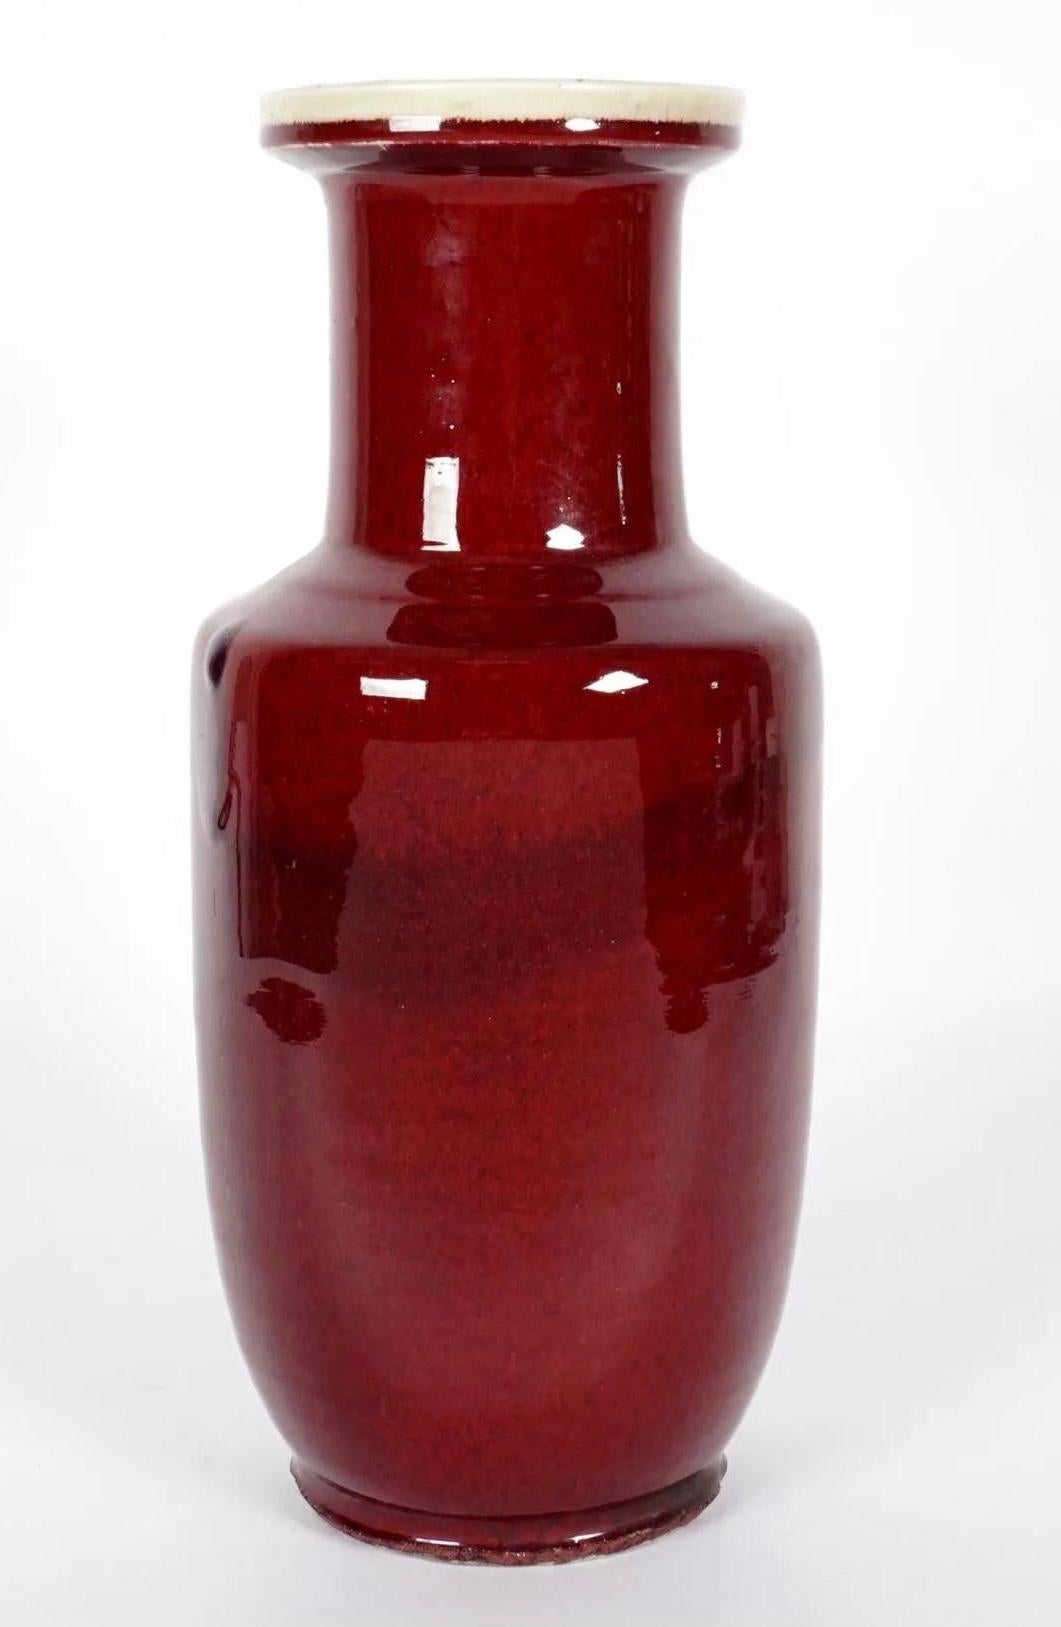 A large 19th Century Chinese Sang de Boeuf vase of baluster form.

The name ‘sang de boeuf’ refers to the color of the vase, which is French for ‘ox blood’. The difficult manufacturing process of this shade, which is achieved through an